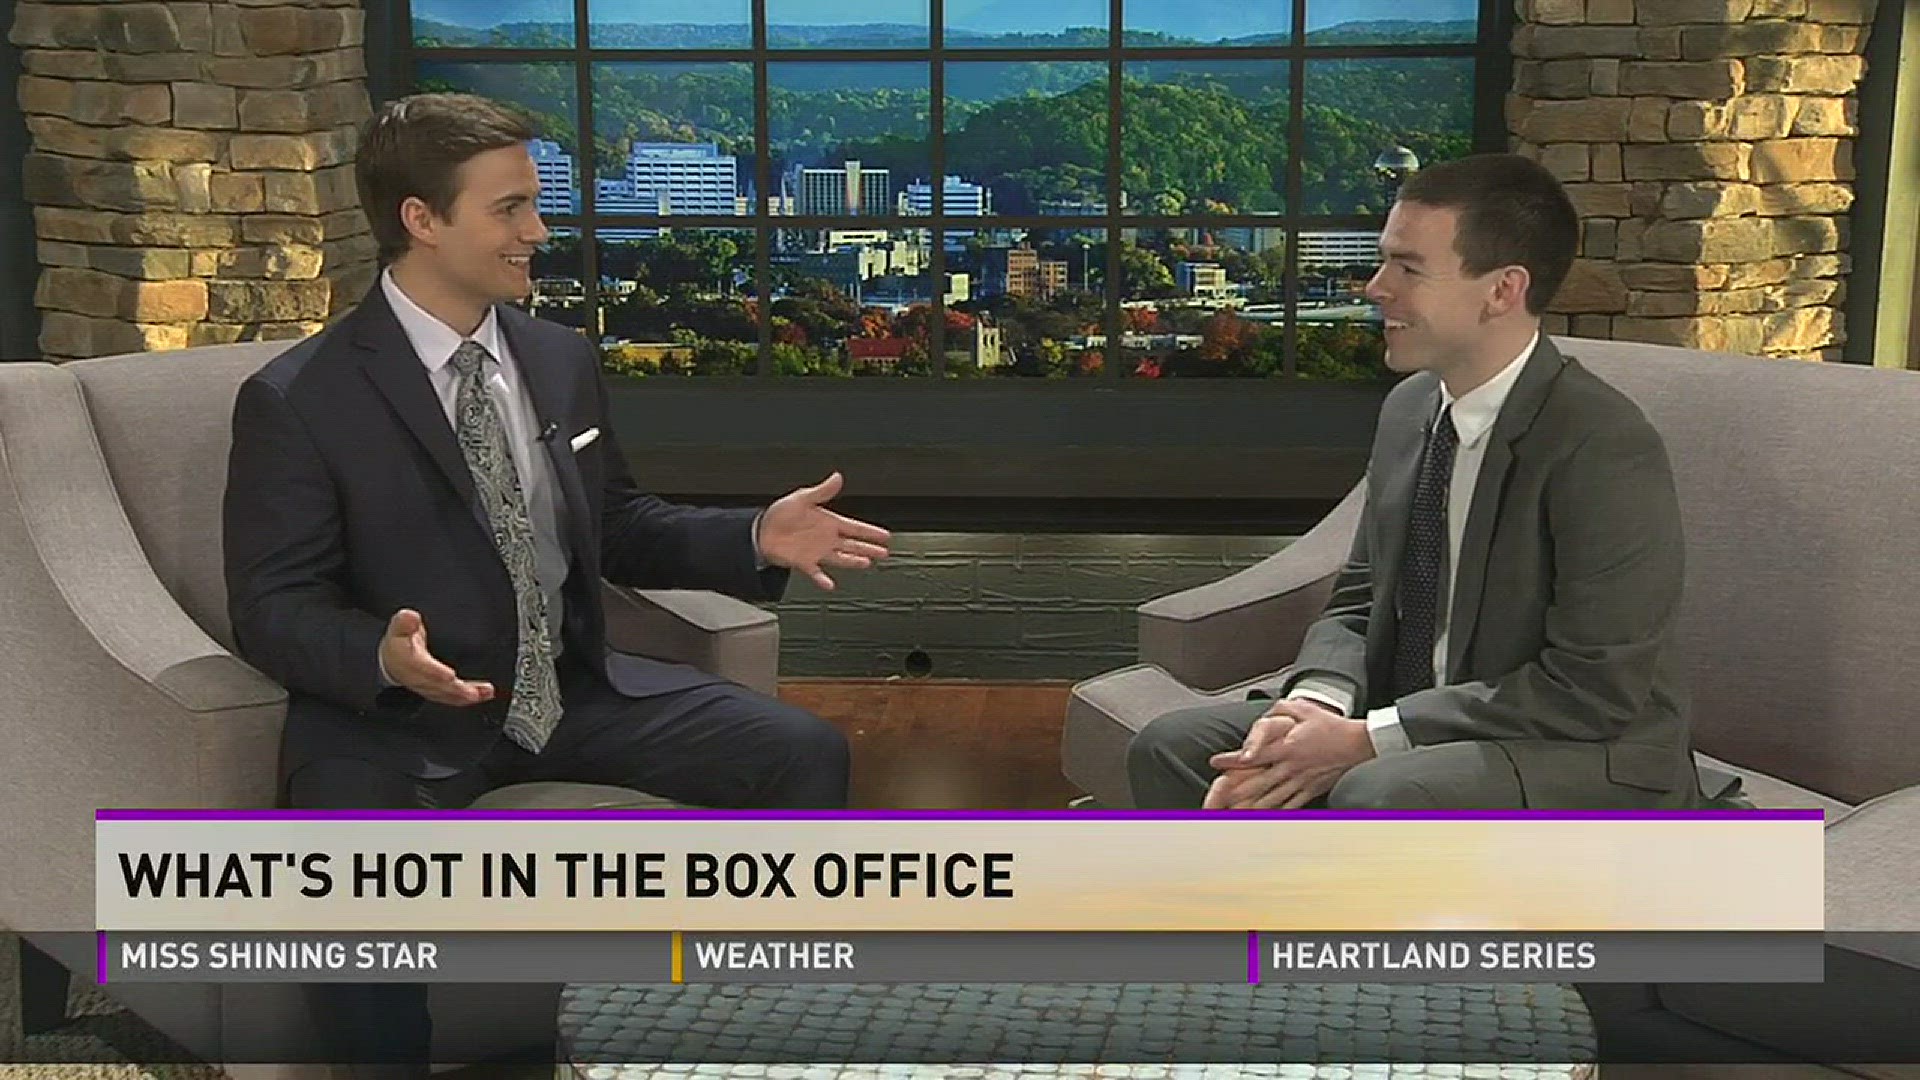 Movie critic Will Meyer stops by to give his box office reviews and Oscar predictions.